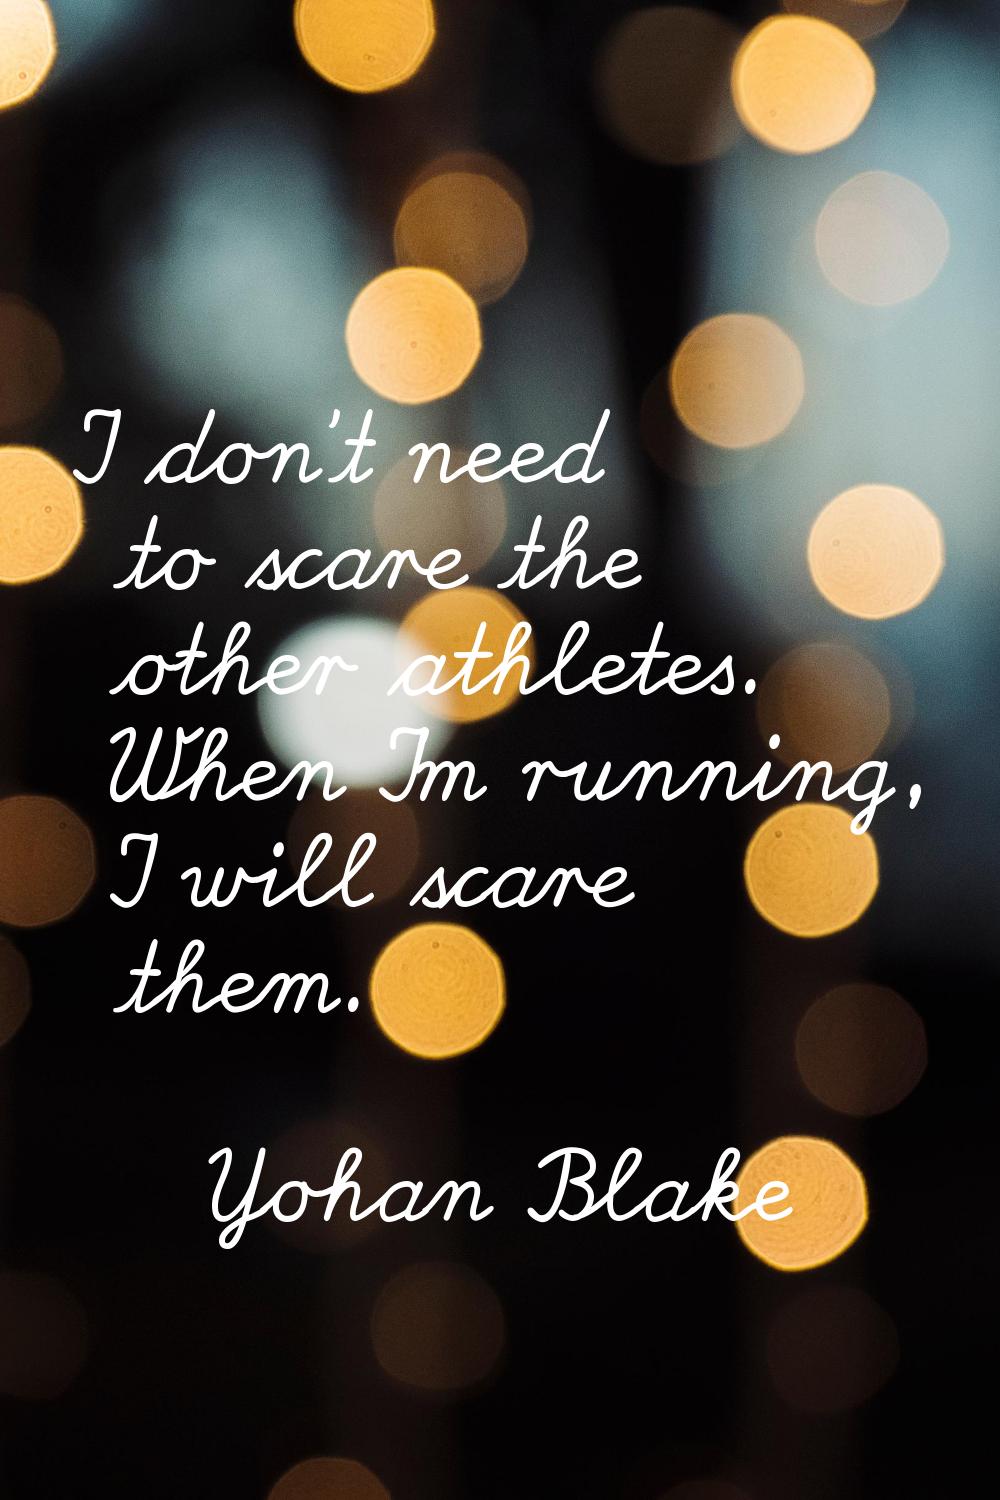 I don't need to scare the other athletes. When I'm running, I will scare them.